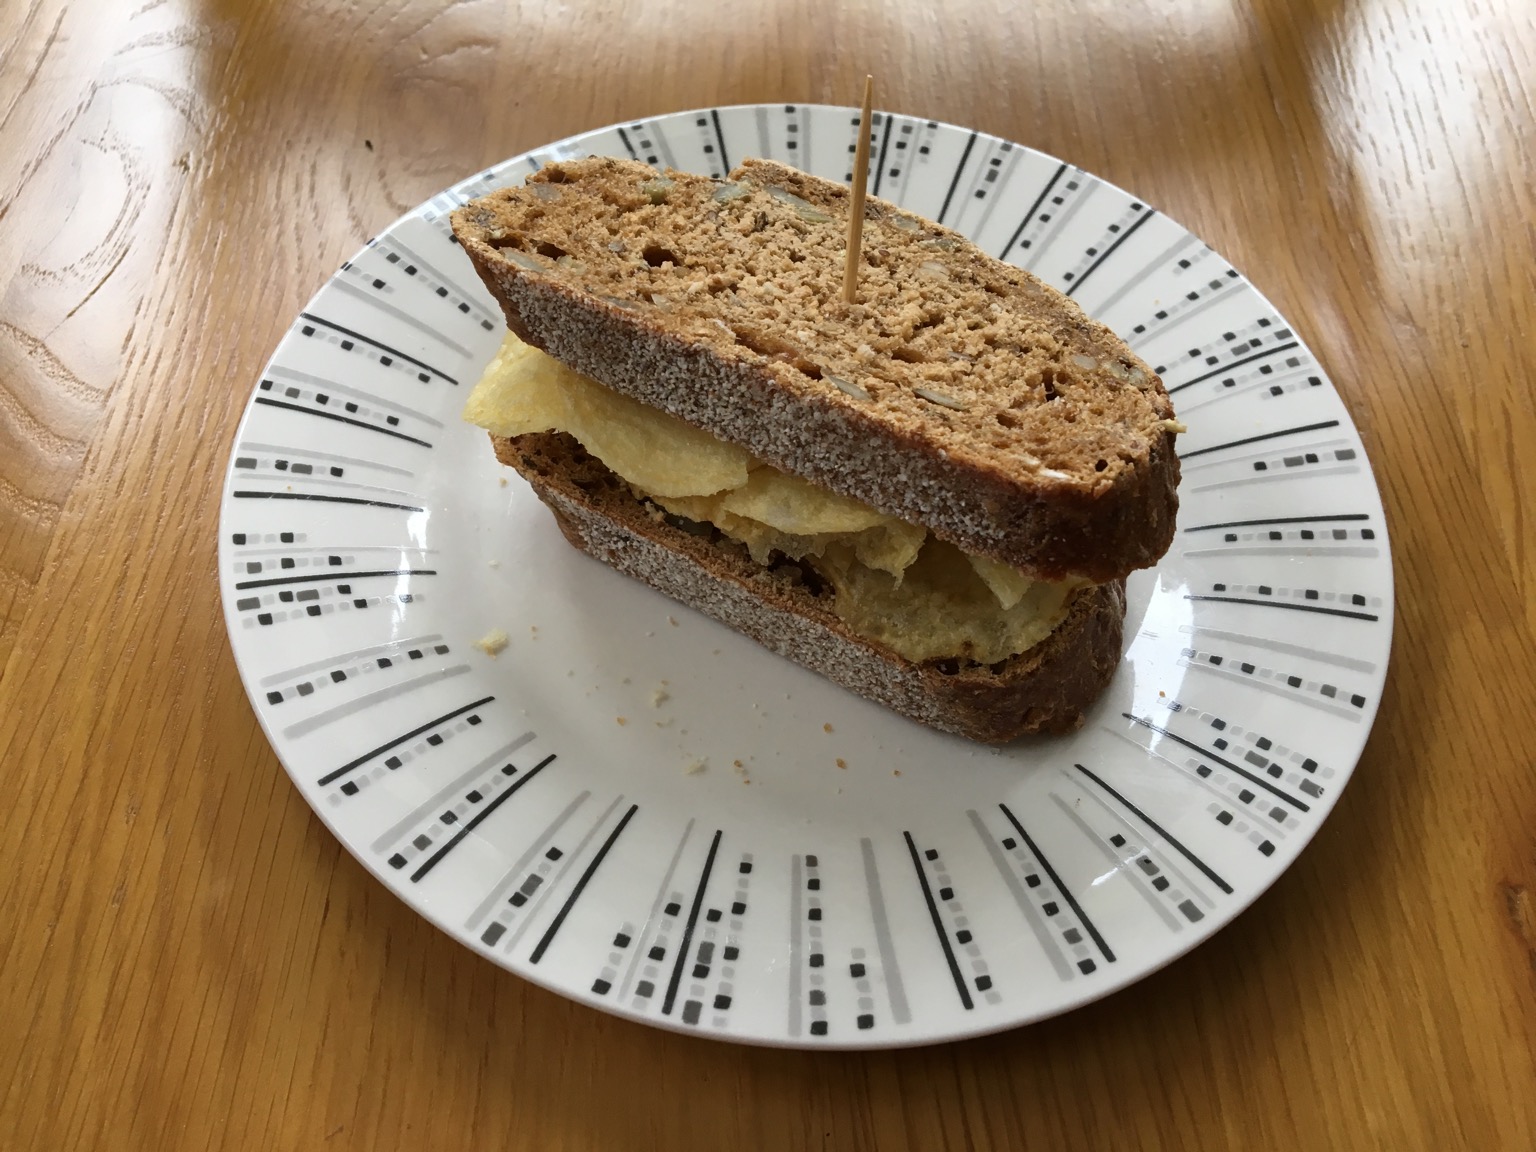 Small brown crisp sandwich with cocktail stick